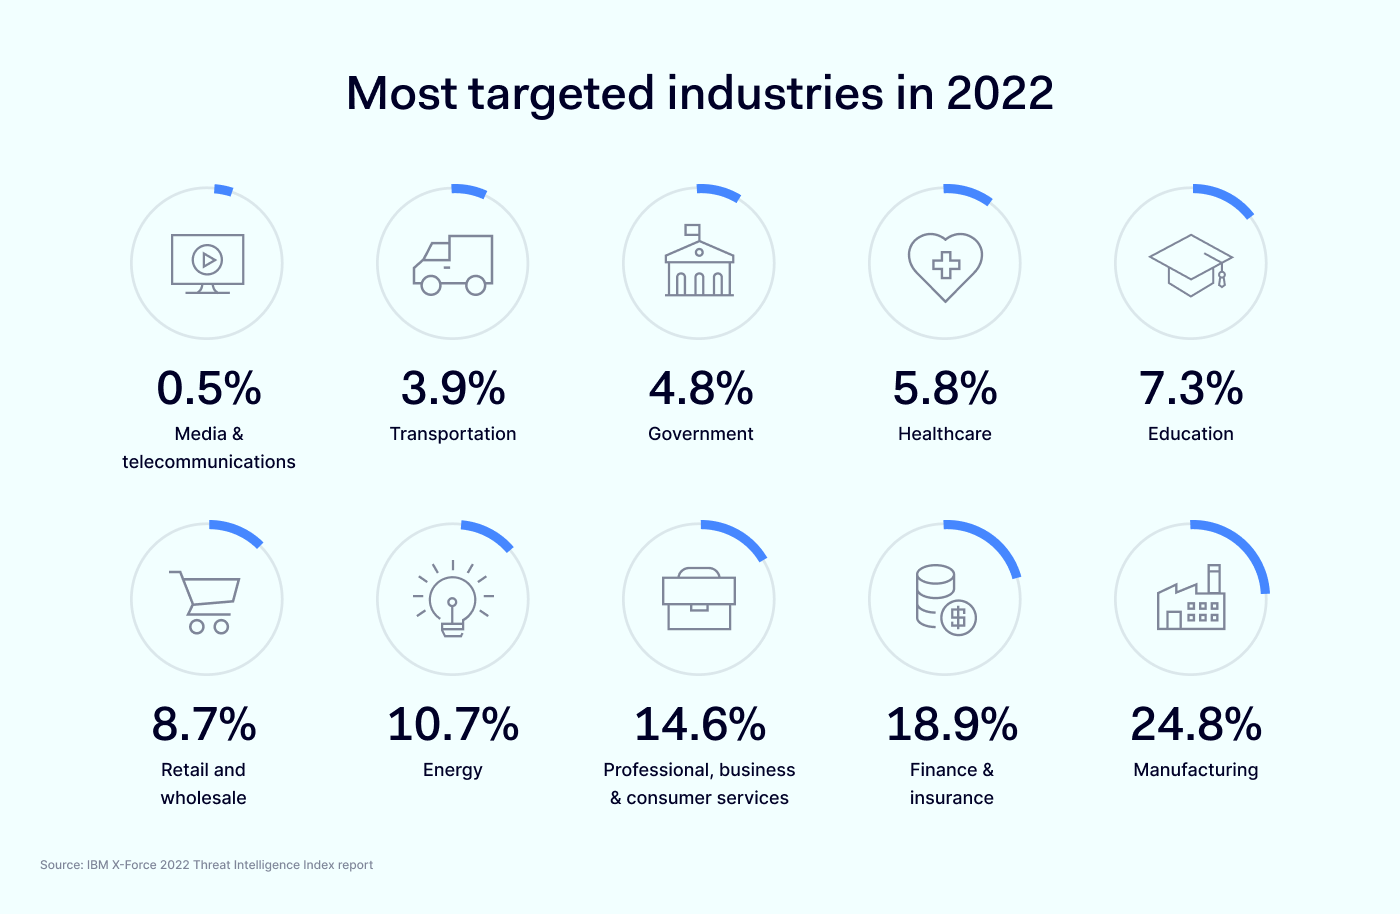 Most targeted industries in 2022 